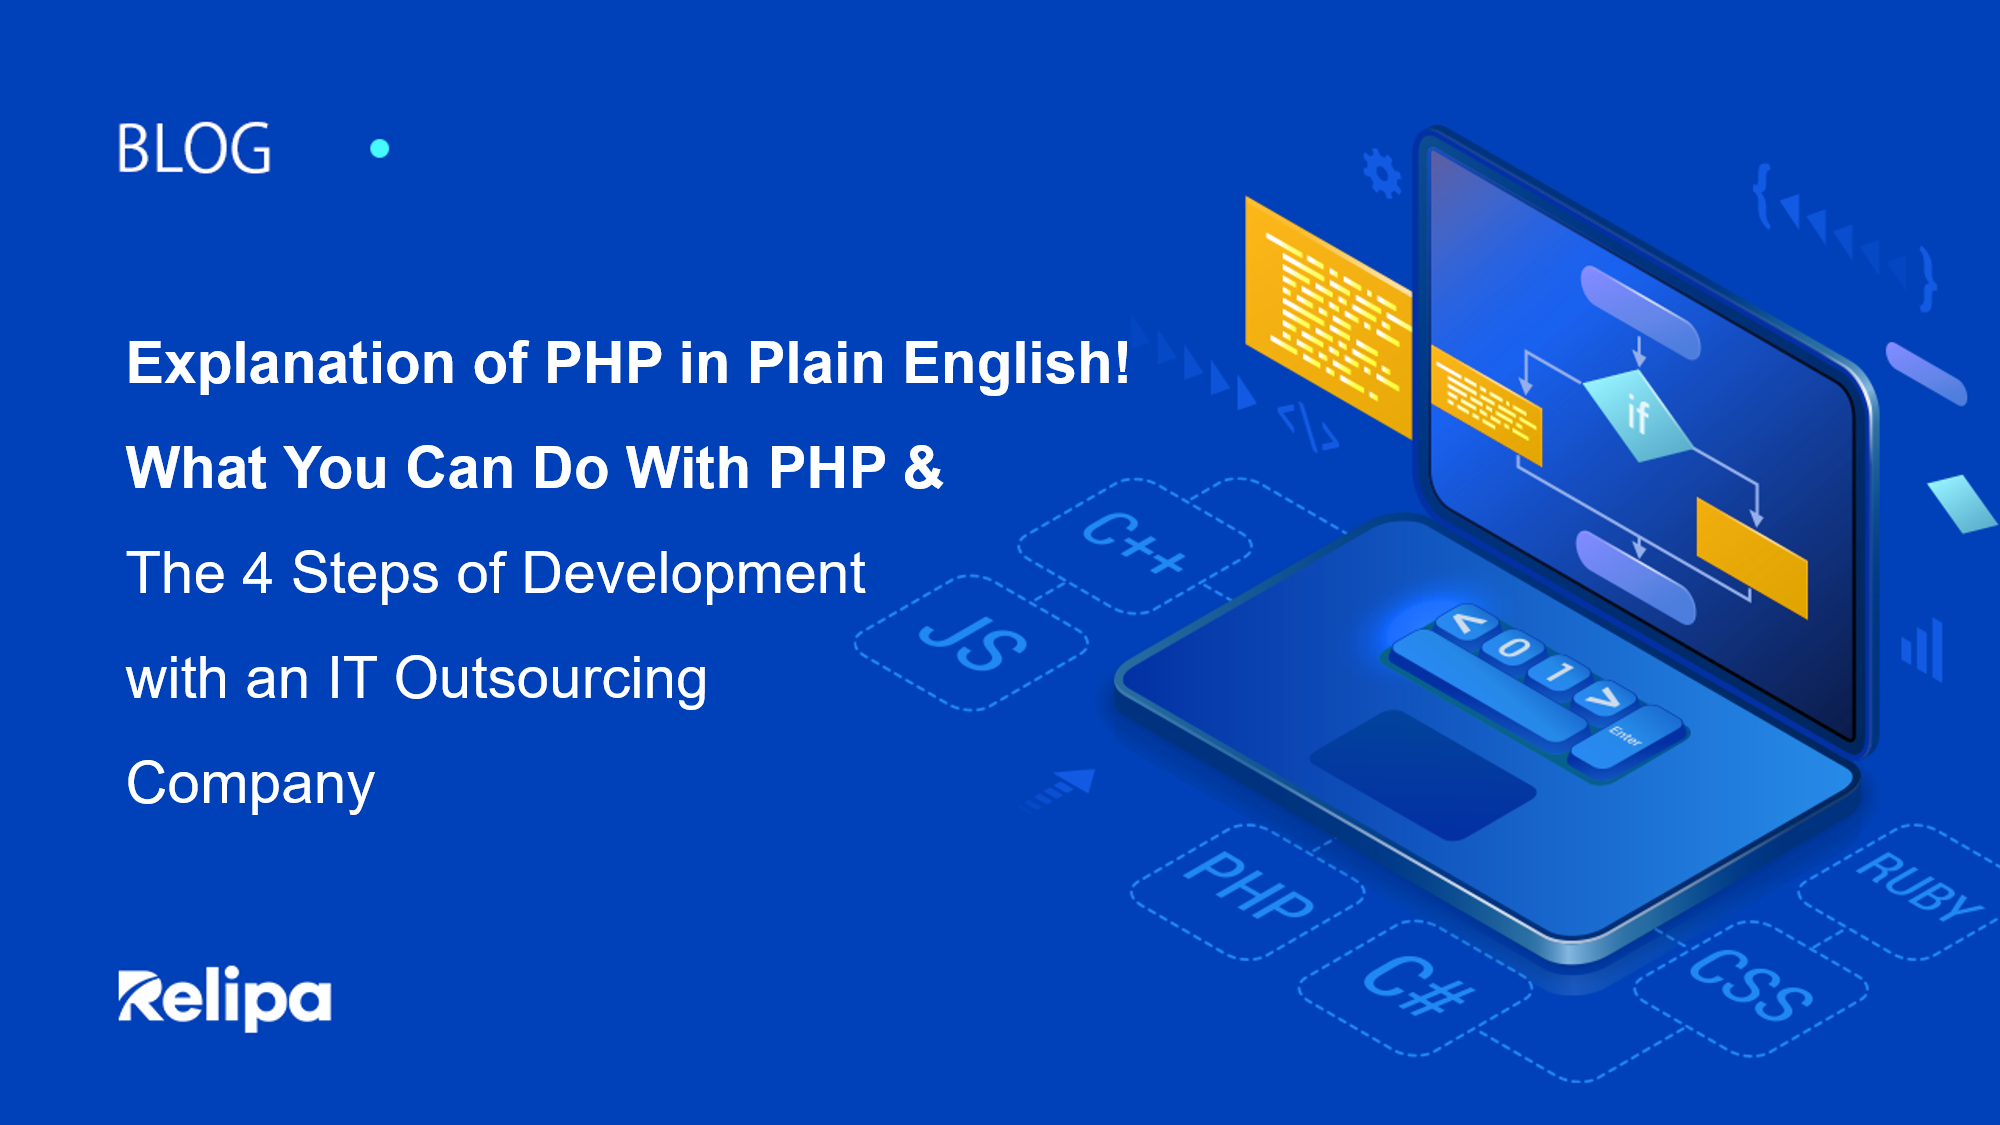 Explanation of PHP in plain English! What you can do with PHP and the 4 Steps of Development with an IT Outsourcing Company